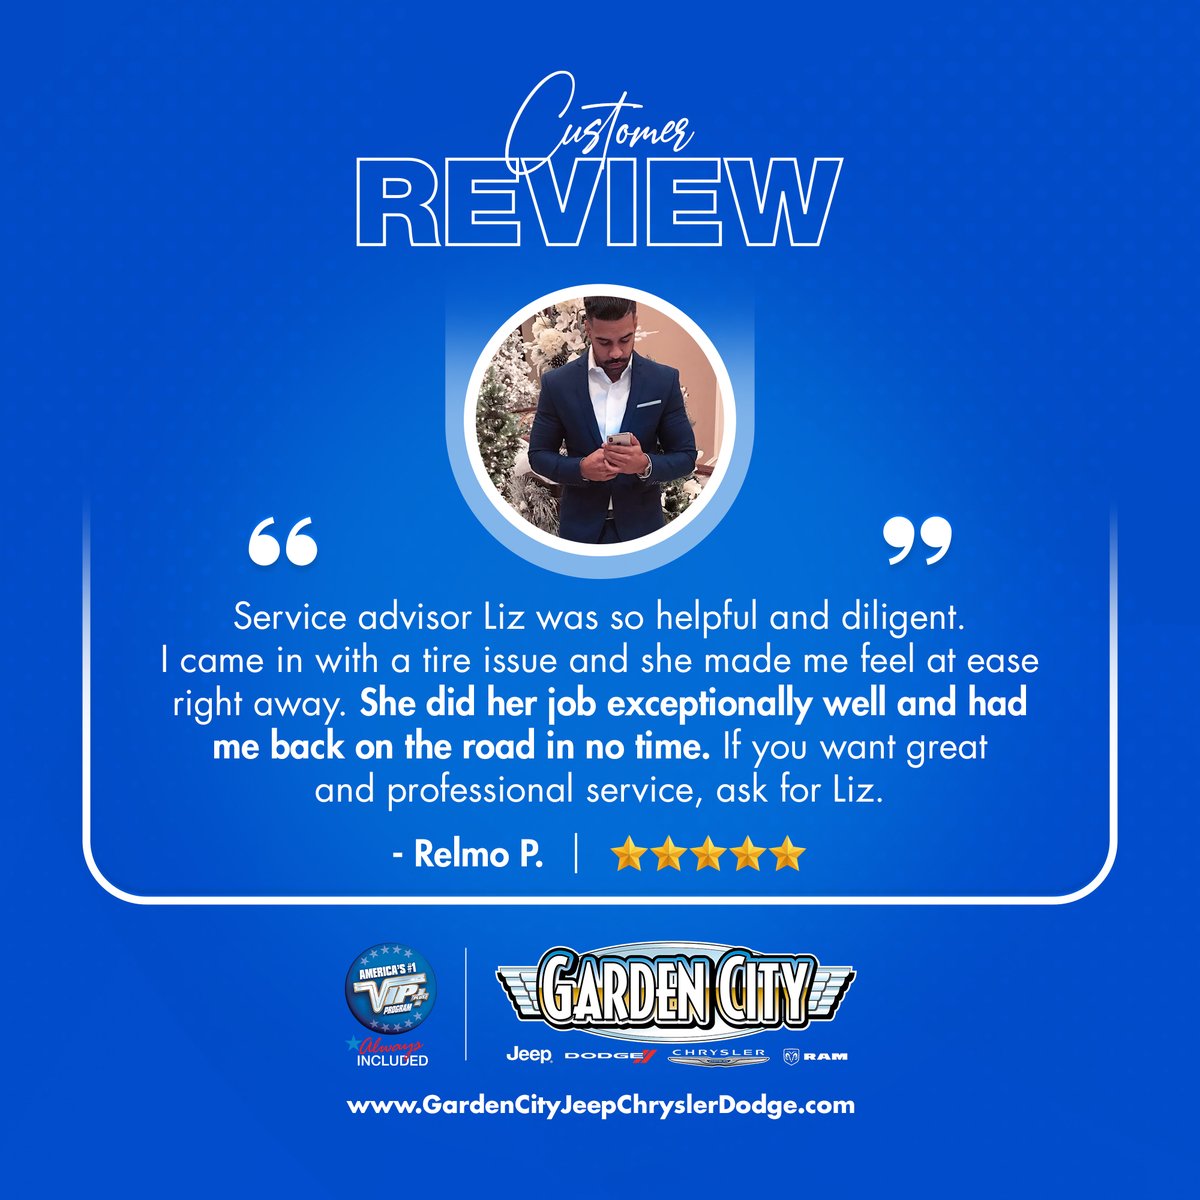 🌟🚗🛠️ Another fantastic review for the Garden City Jeep service team! Is your vehicle overdue for service? Schedule your appointment today and experience our top-rated care.

💻 BOOK NOW
🌐 GardenCityJeepChryslerDodge.com
📞 516-930-5310